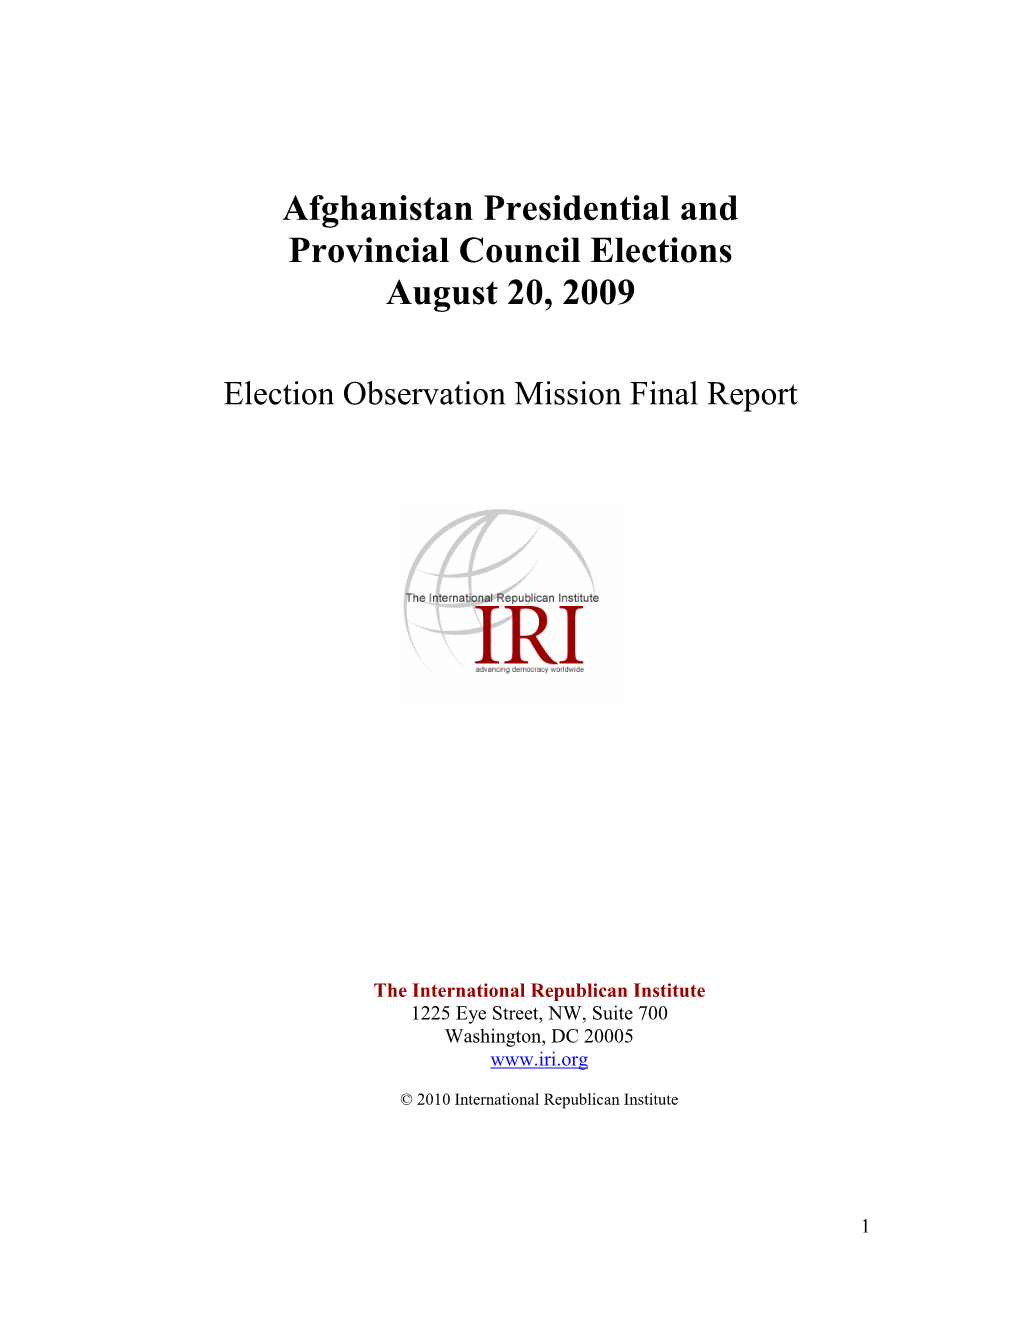 Afghanistan Presidential and Provincial Council Elections August 20, 2009